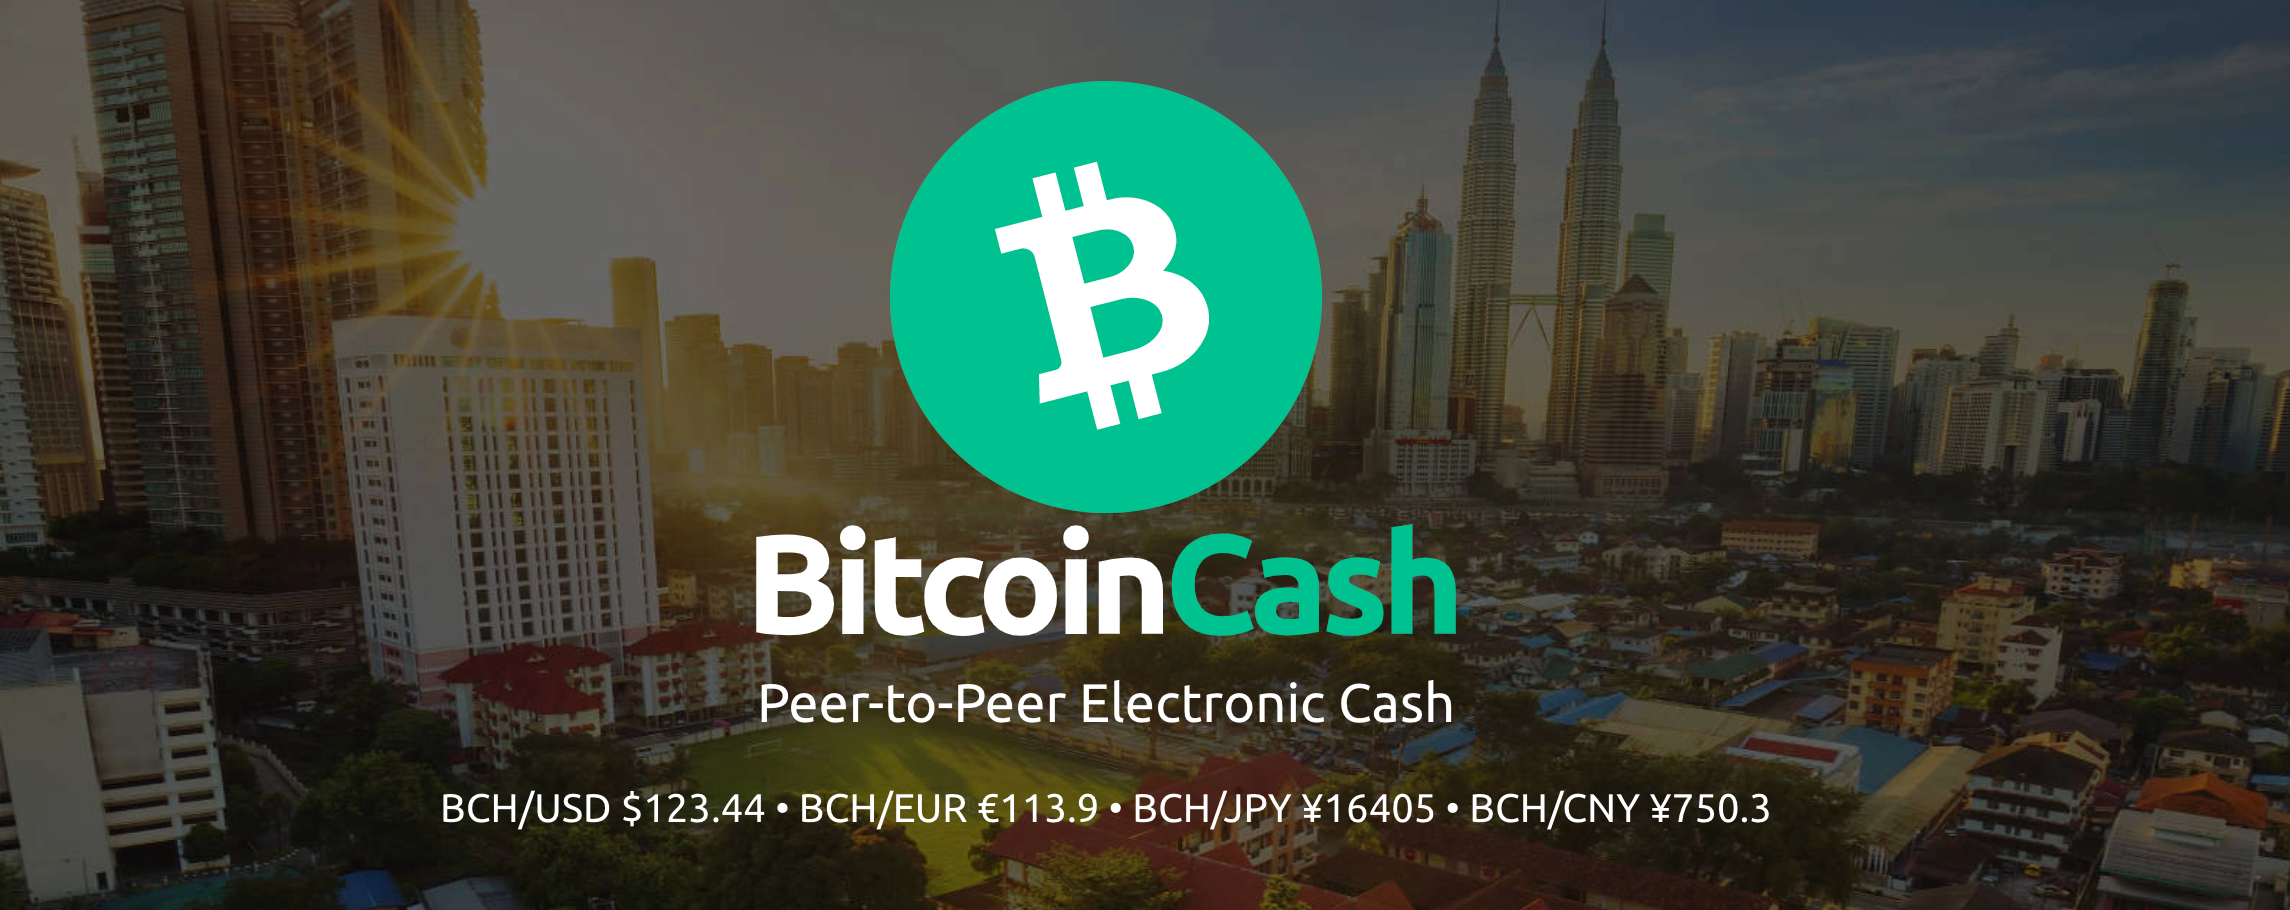 Bitcoin Cash (BCH banner with price quotes by currency underneath the logo.